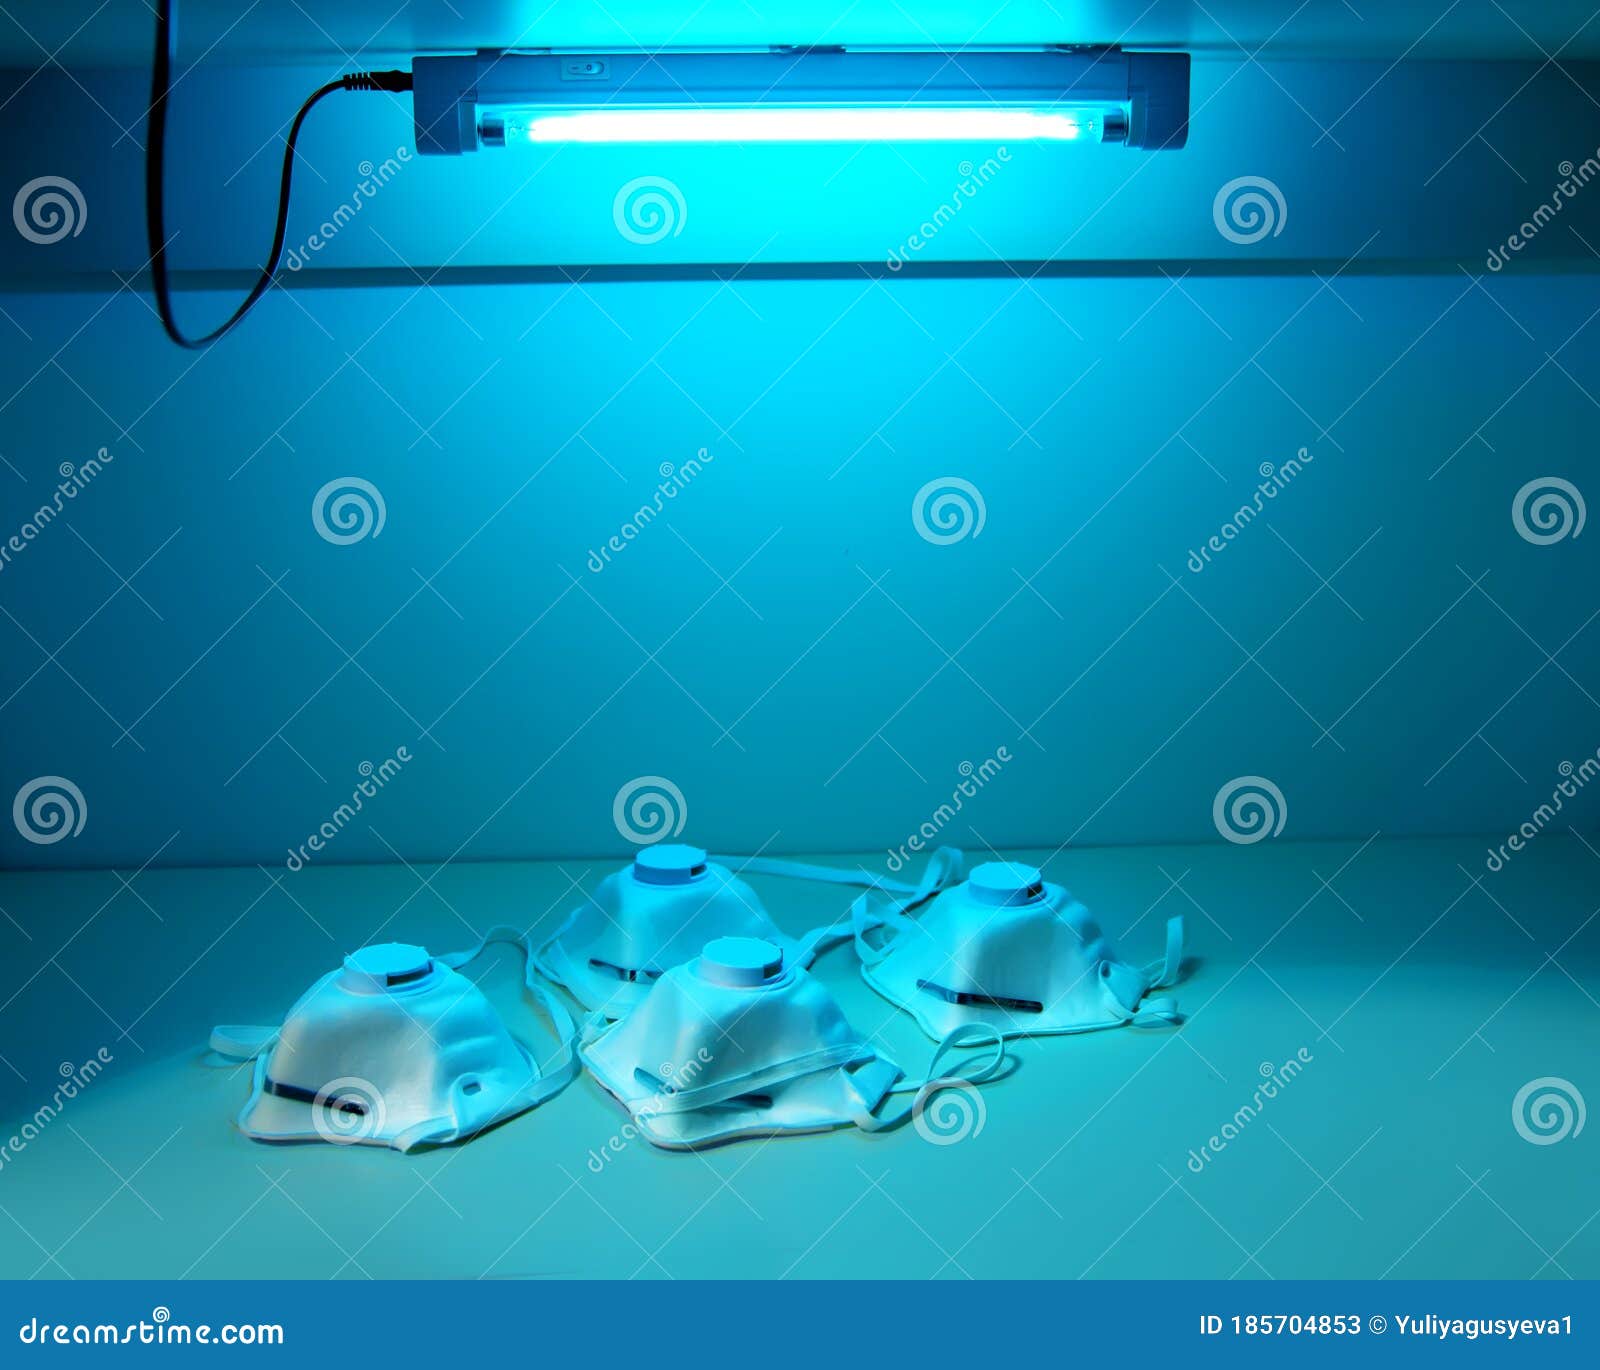 protection and safety of medical workers.protective masks n95 are sterilized under ultraviolet light